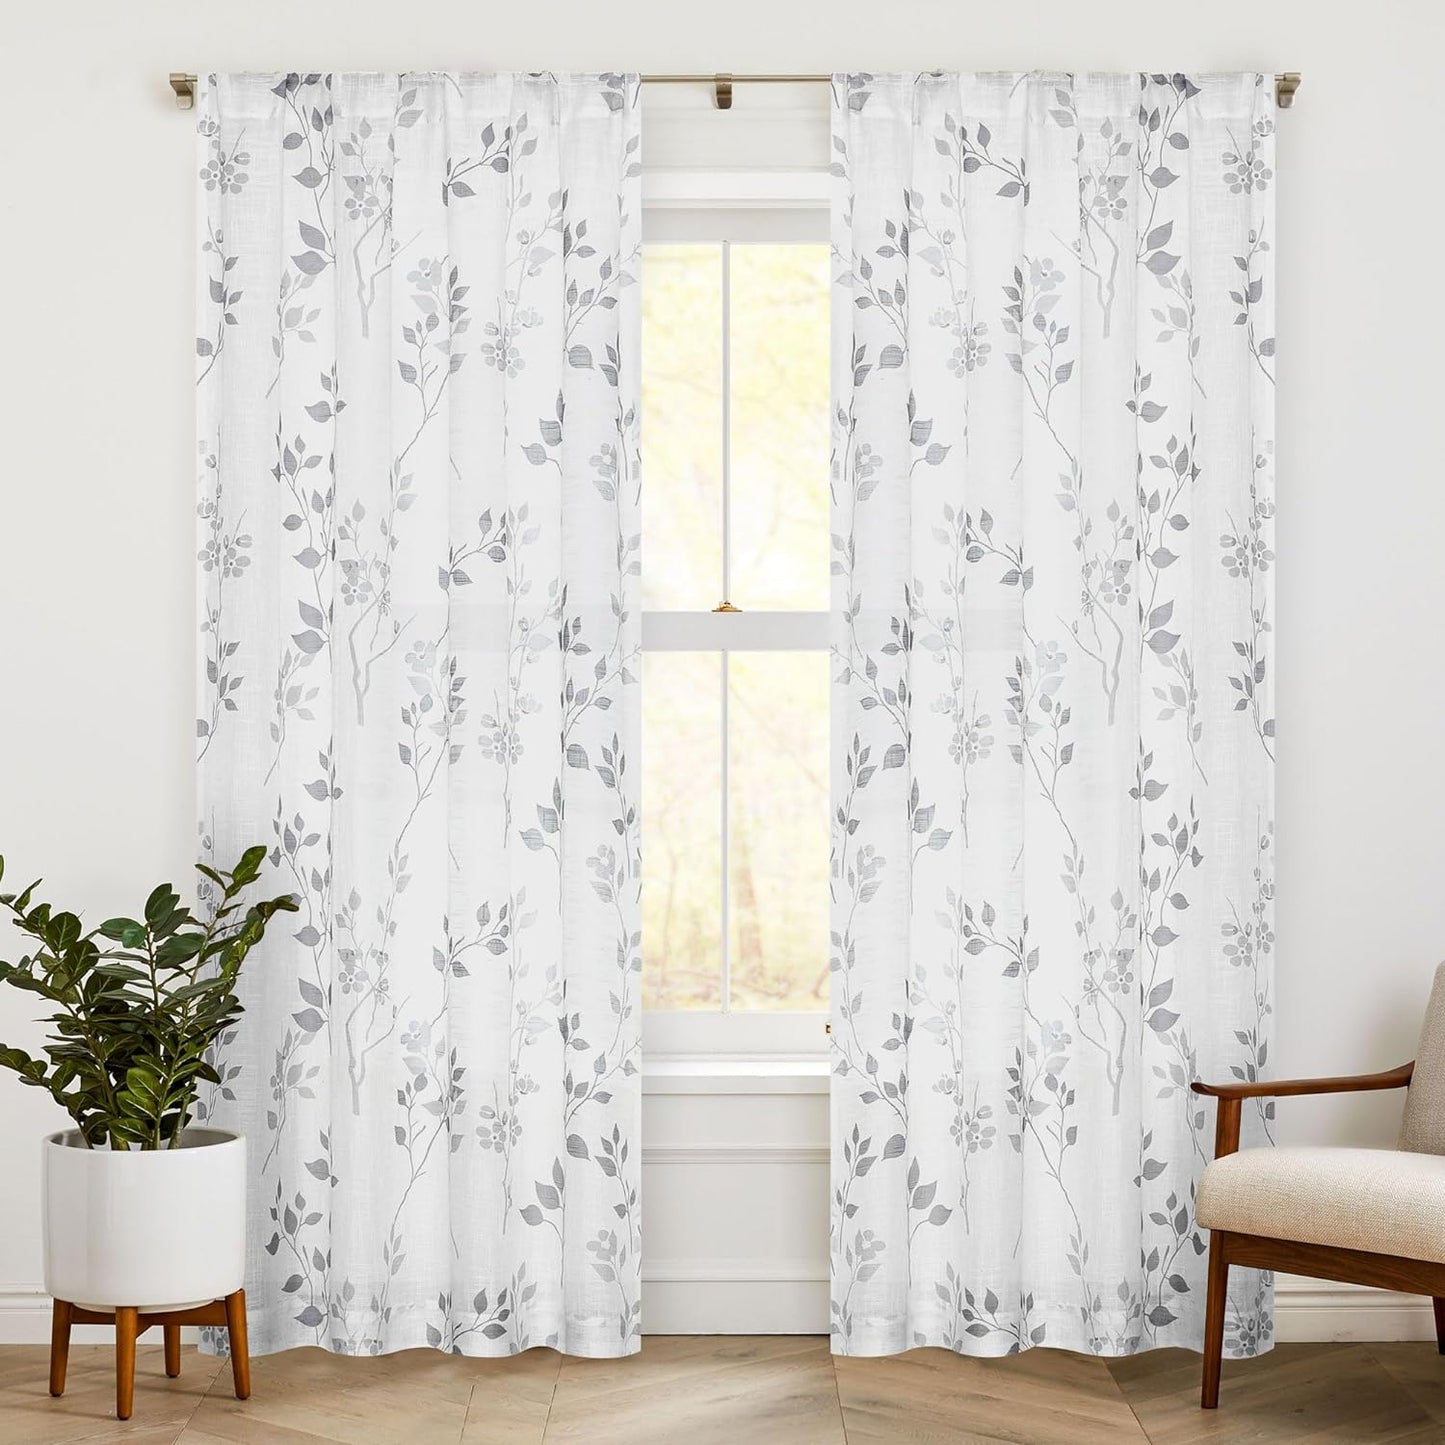 Beauoop Floral Semi Sheer Curtains 84 Inch Long for Living Room Bedroom Farmhouse Botanical Leaf Printed Rustic Linen Texture Panel Drapes Rod Pocket Window Treatment,2 Panels,50 Wide,Yellow/Gray  Beauoop Grey 50"X108"X2 